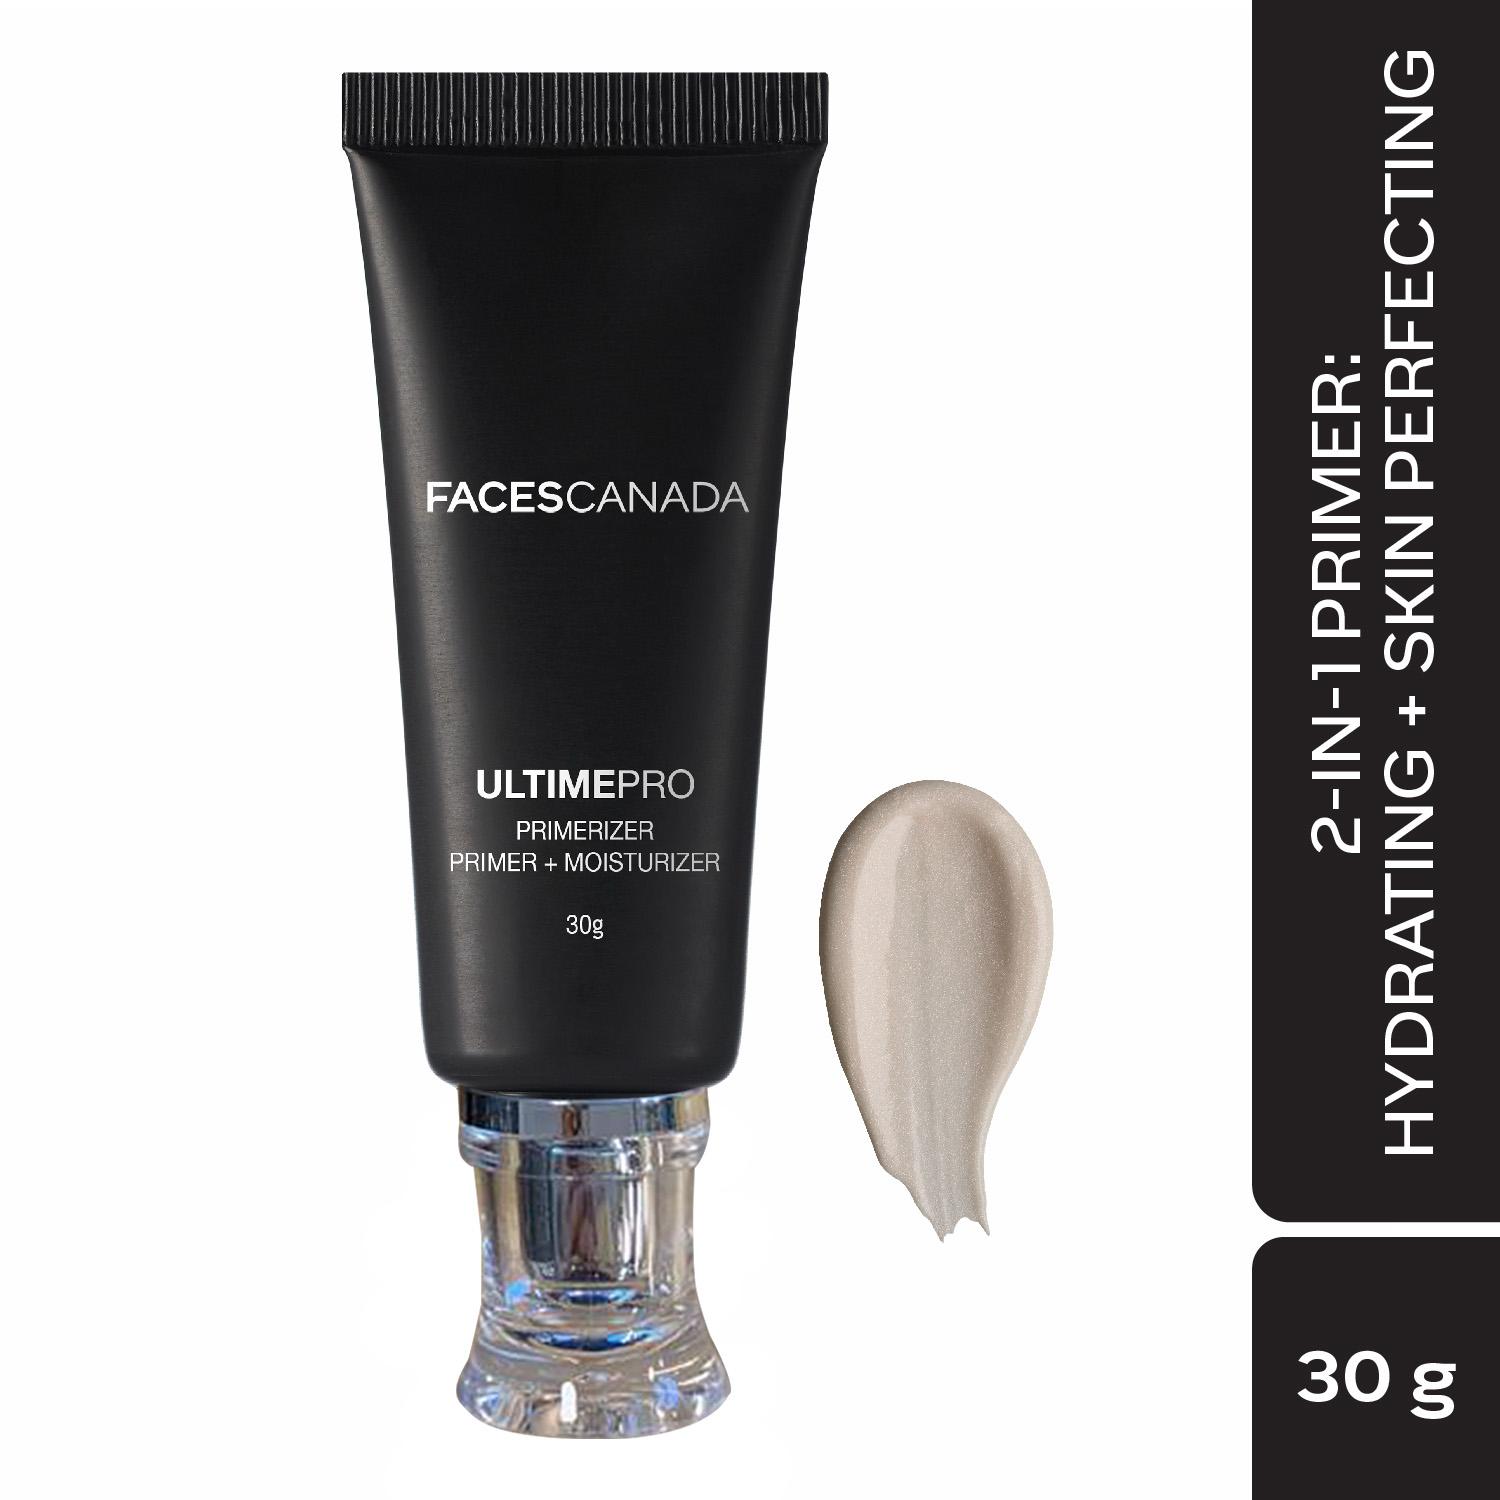 Faces Canada | Faces Canada Ultime Pro Primerizer Primer + Moisturizer, Skin Perfecting & Hydrating (30 g)